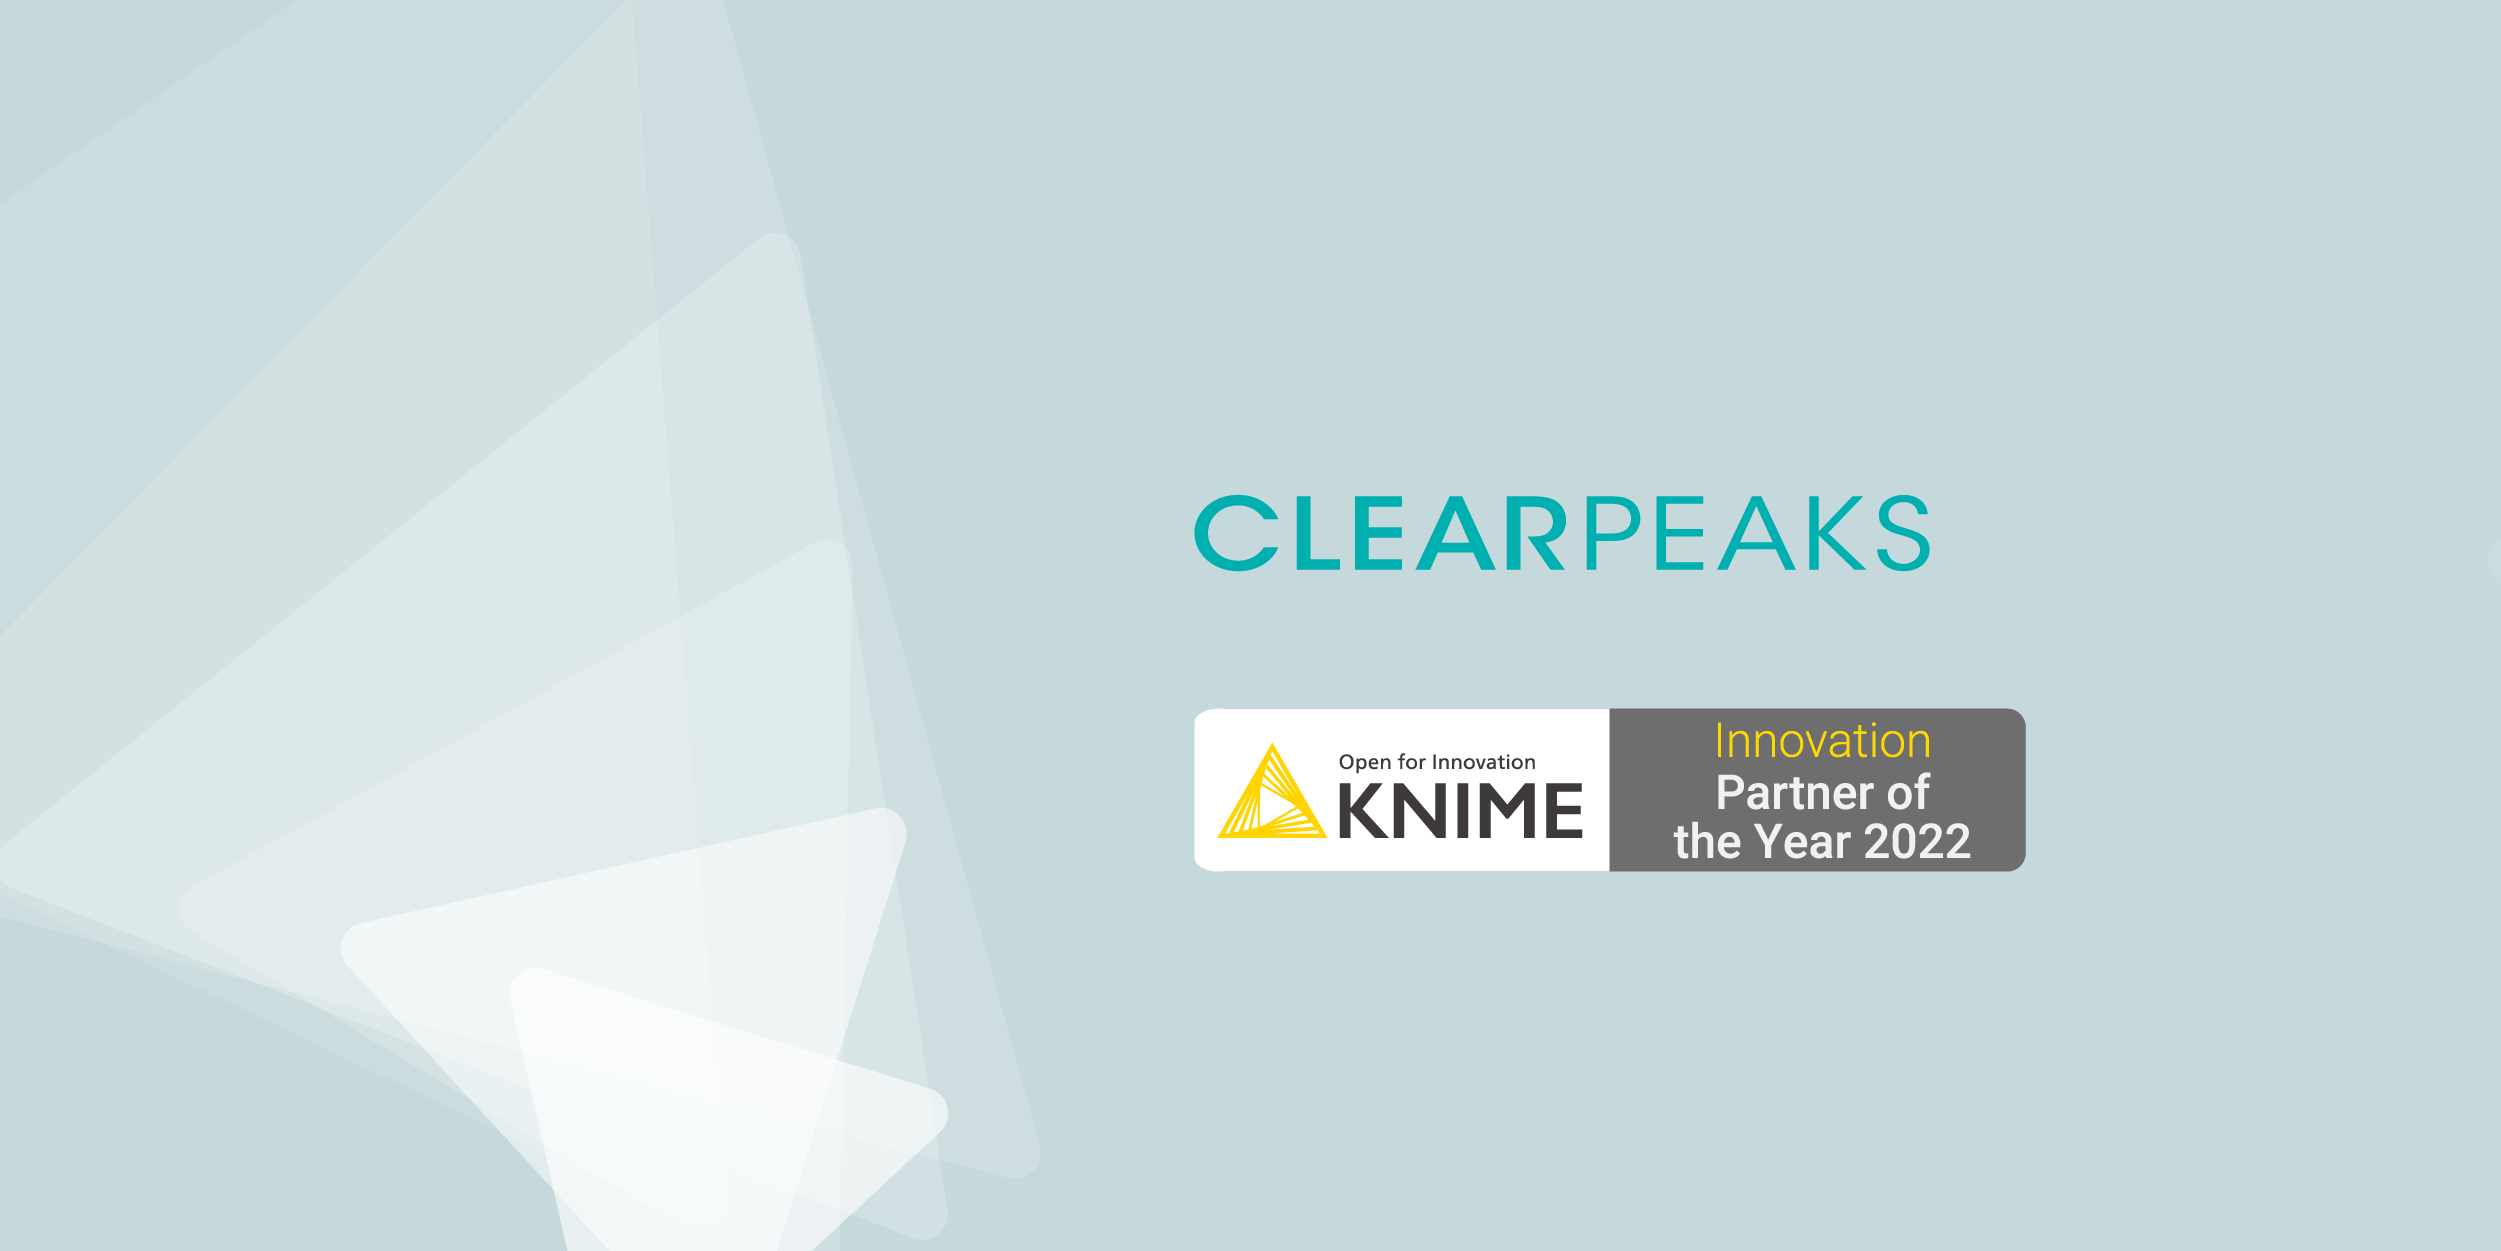 ClearPeaks is KNIME Innovation Partner of the Year 2022